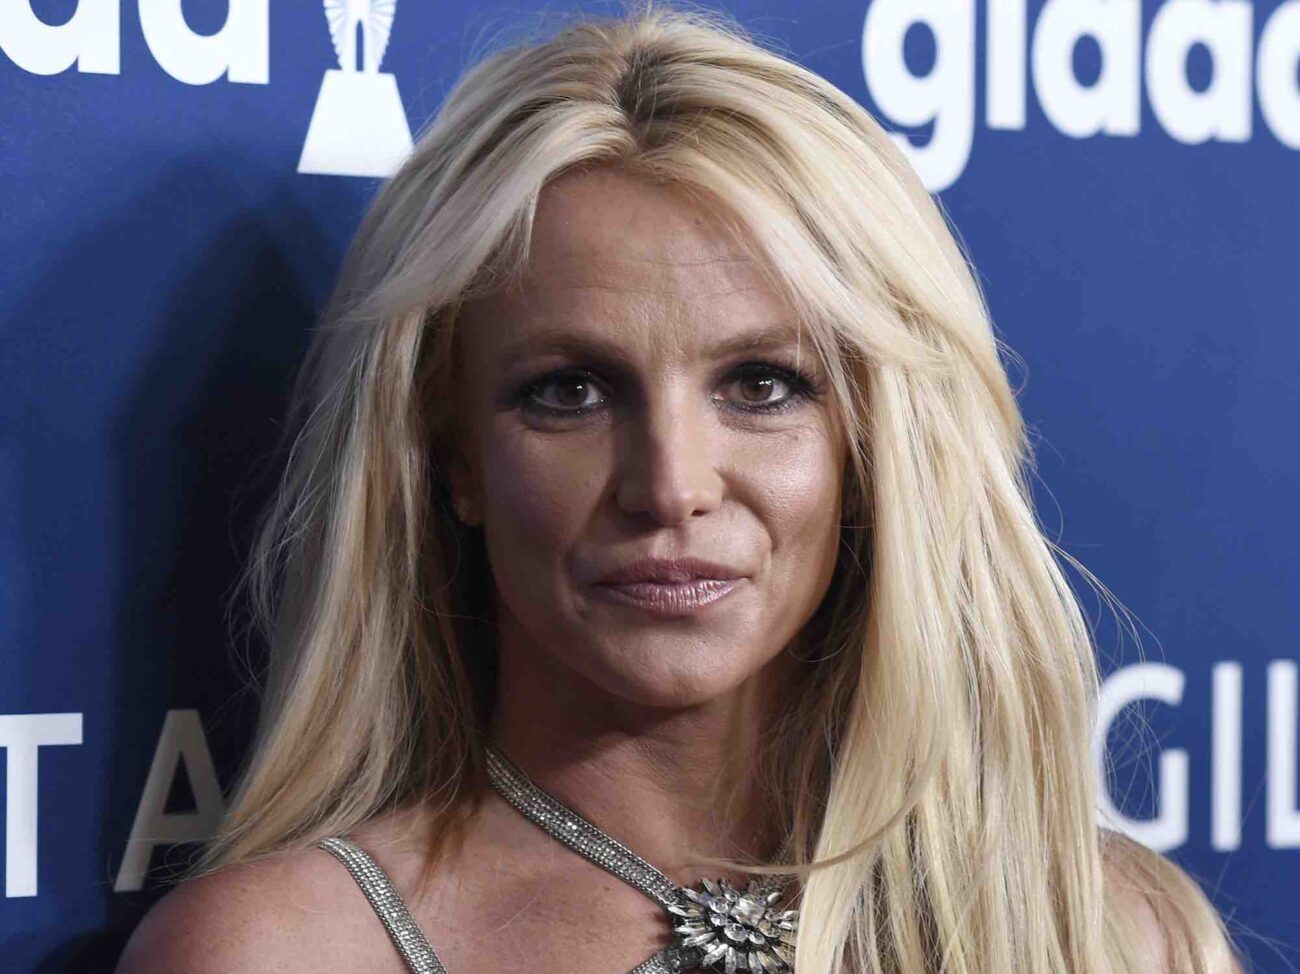 Did Britney Spears's father secretly spy on her while she was under her conservatorship? Look at the newest evidence.